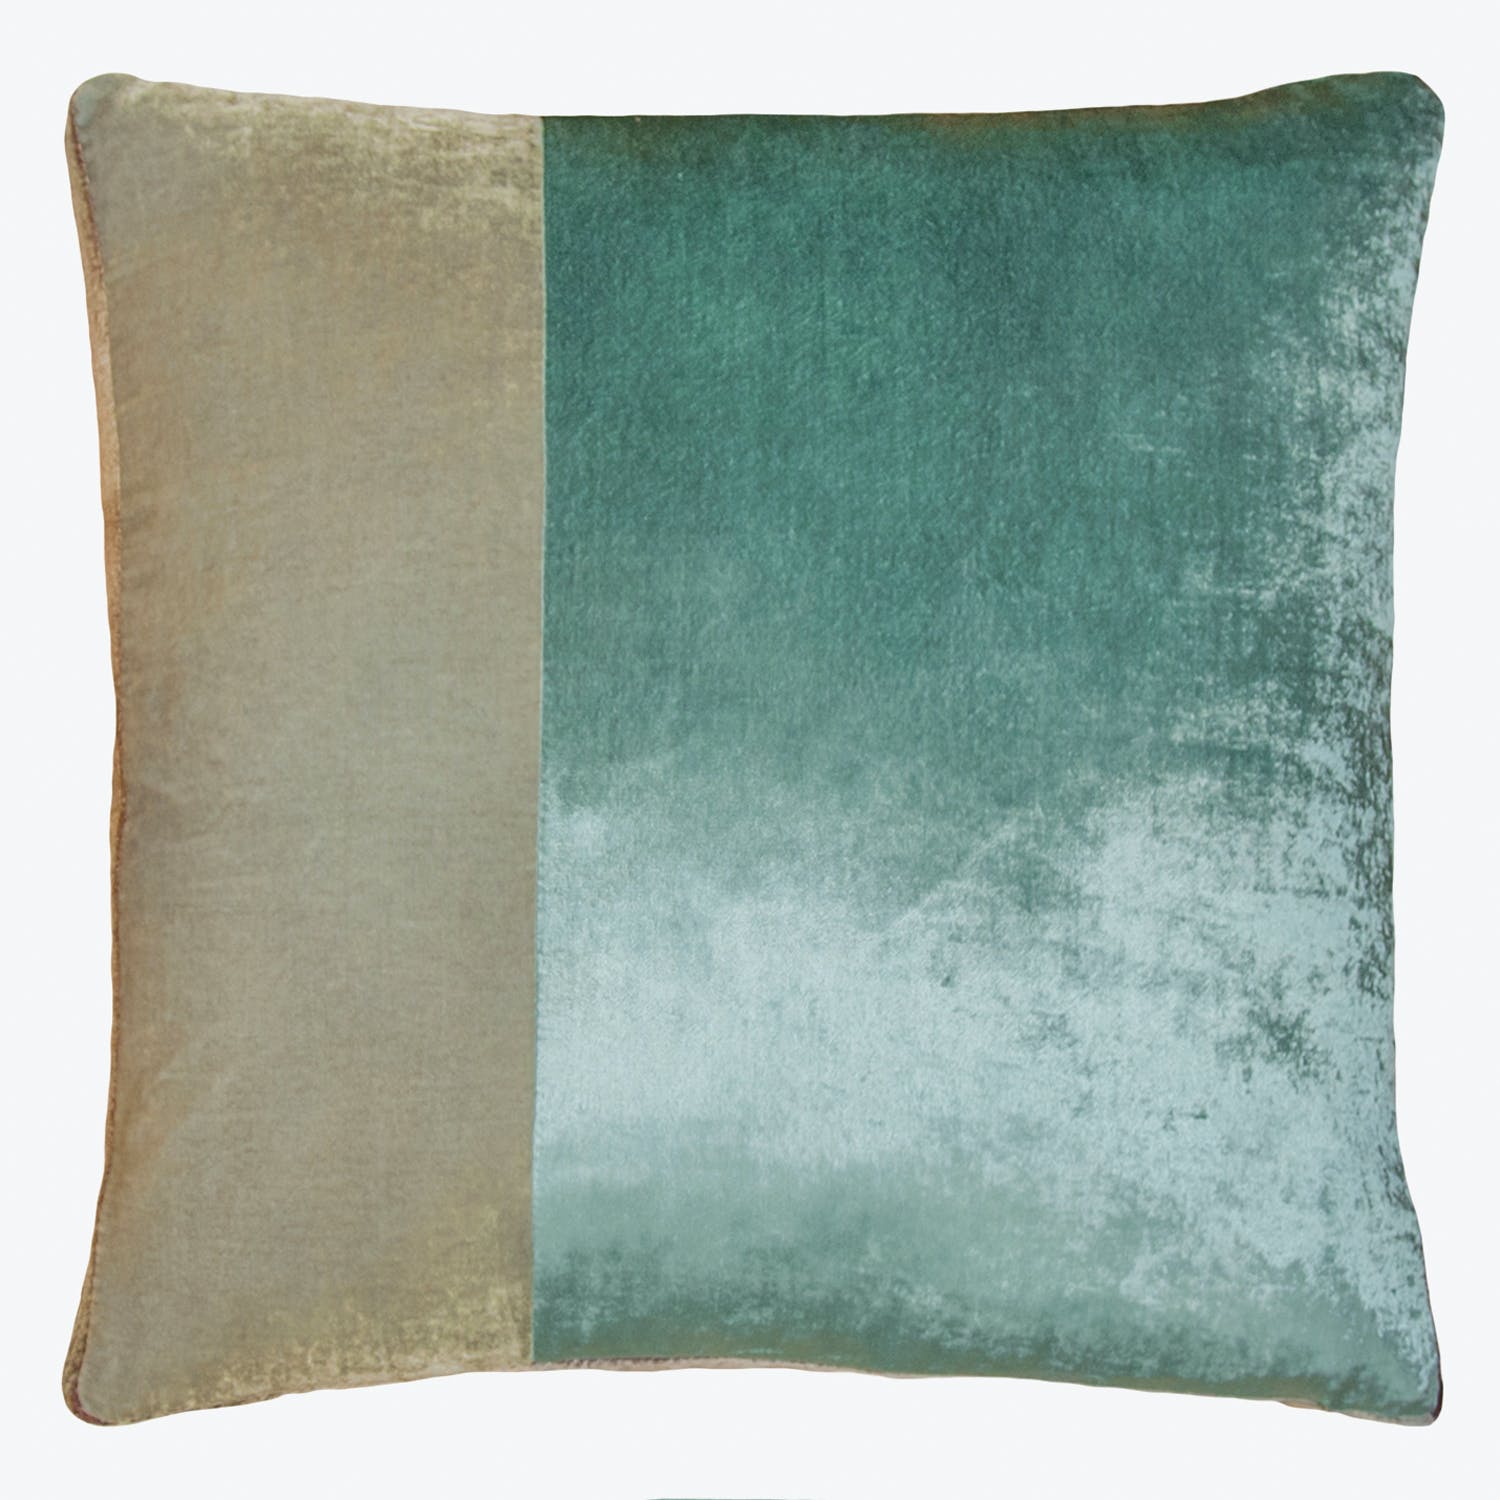 Square decorative pillow with two-tone design and textured finish.